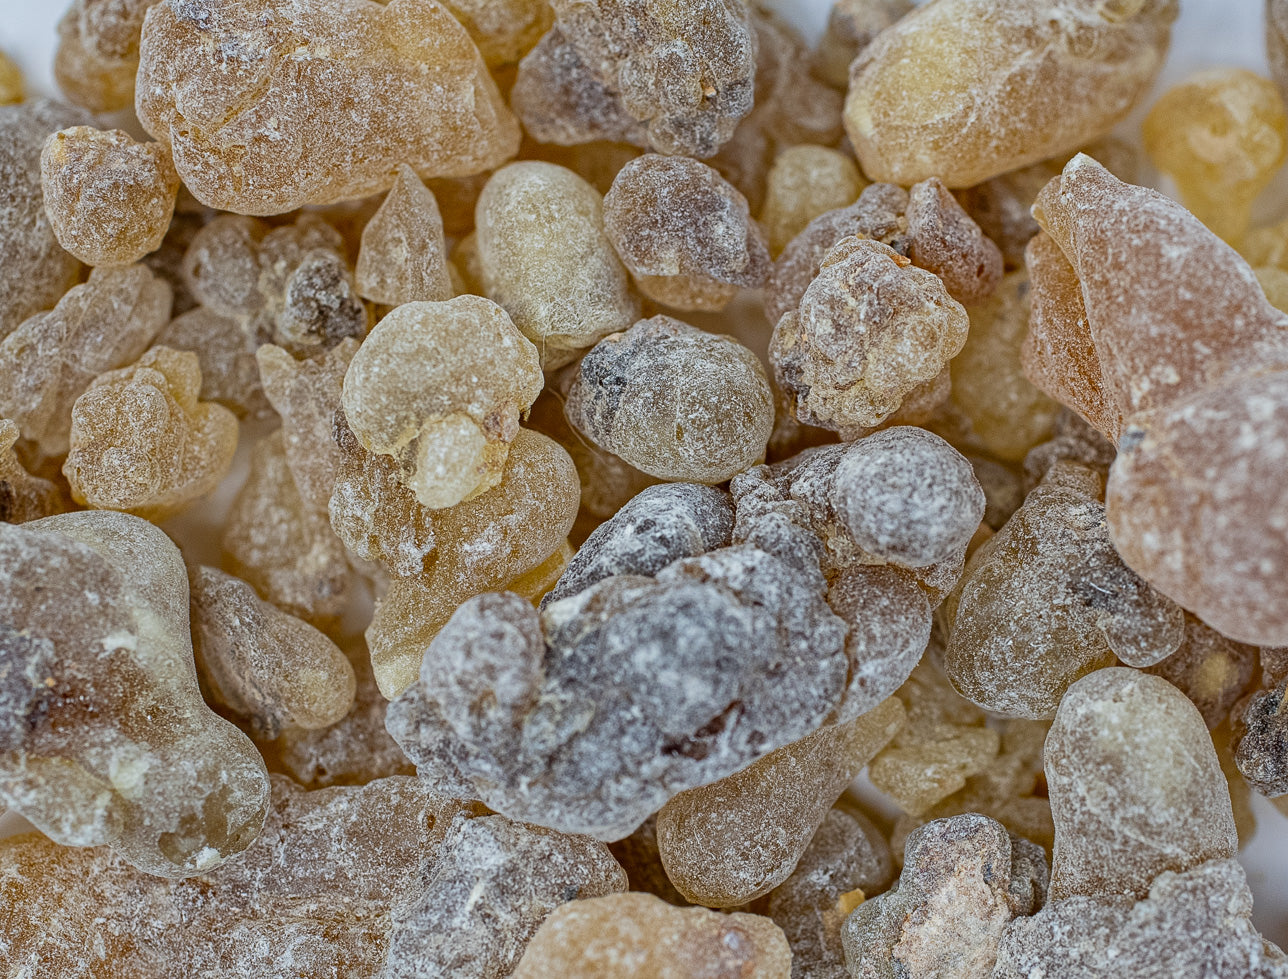 Extreme close up of Red Hojary Boswellia Resin